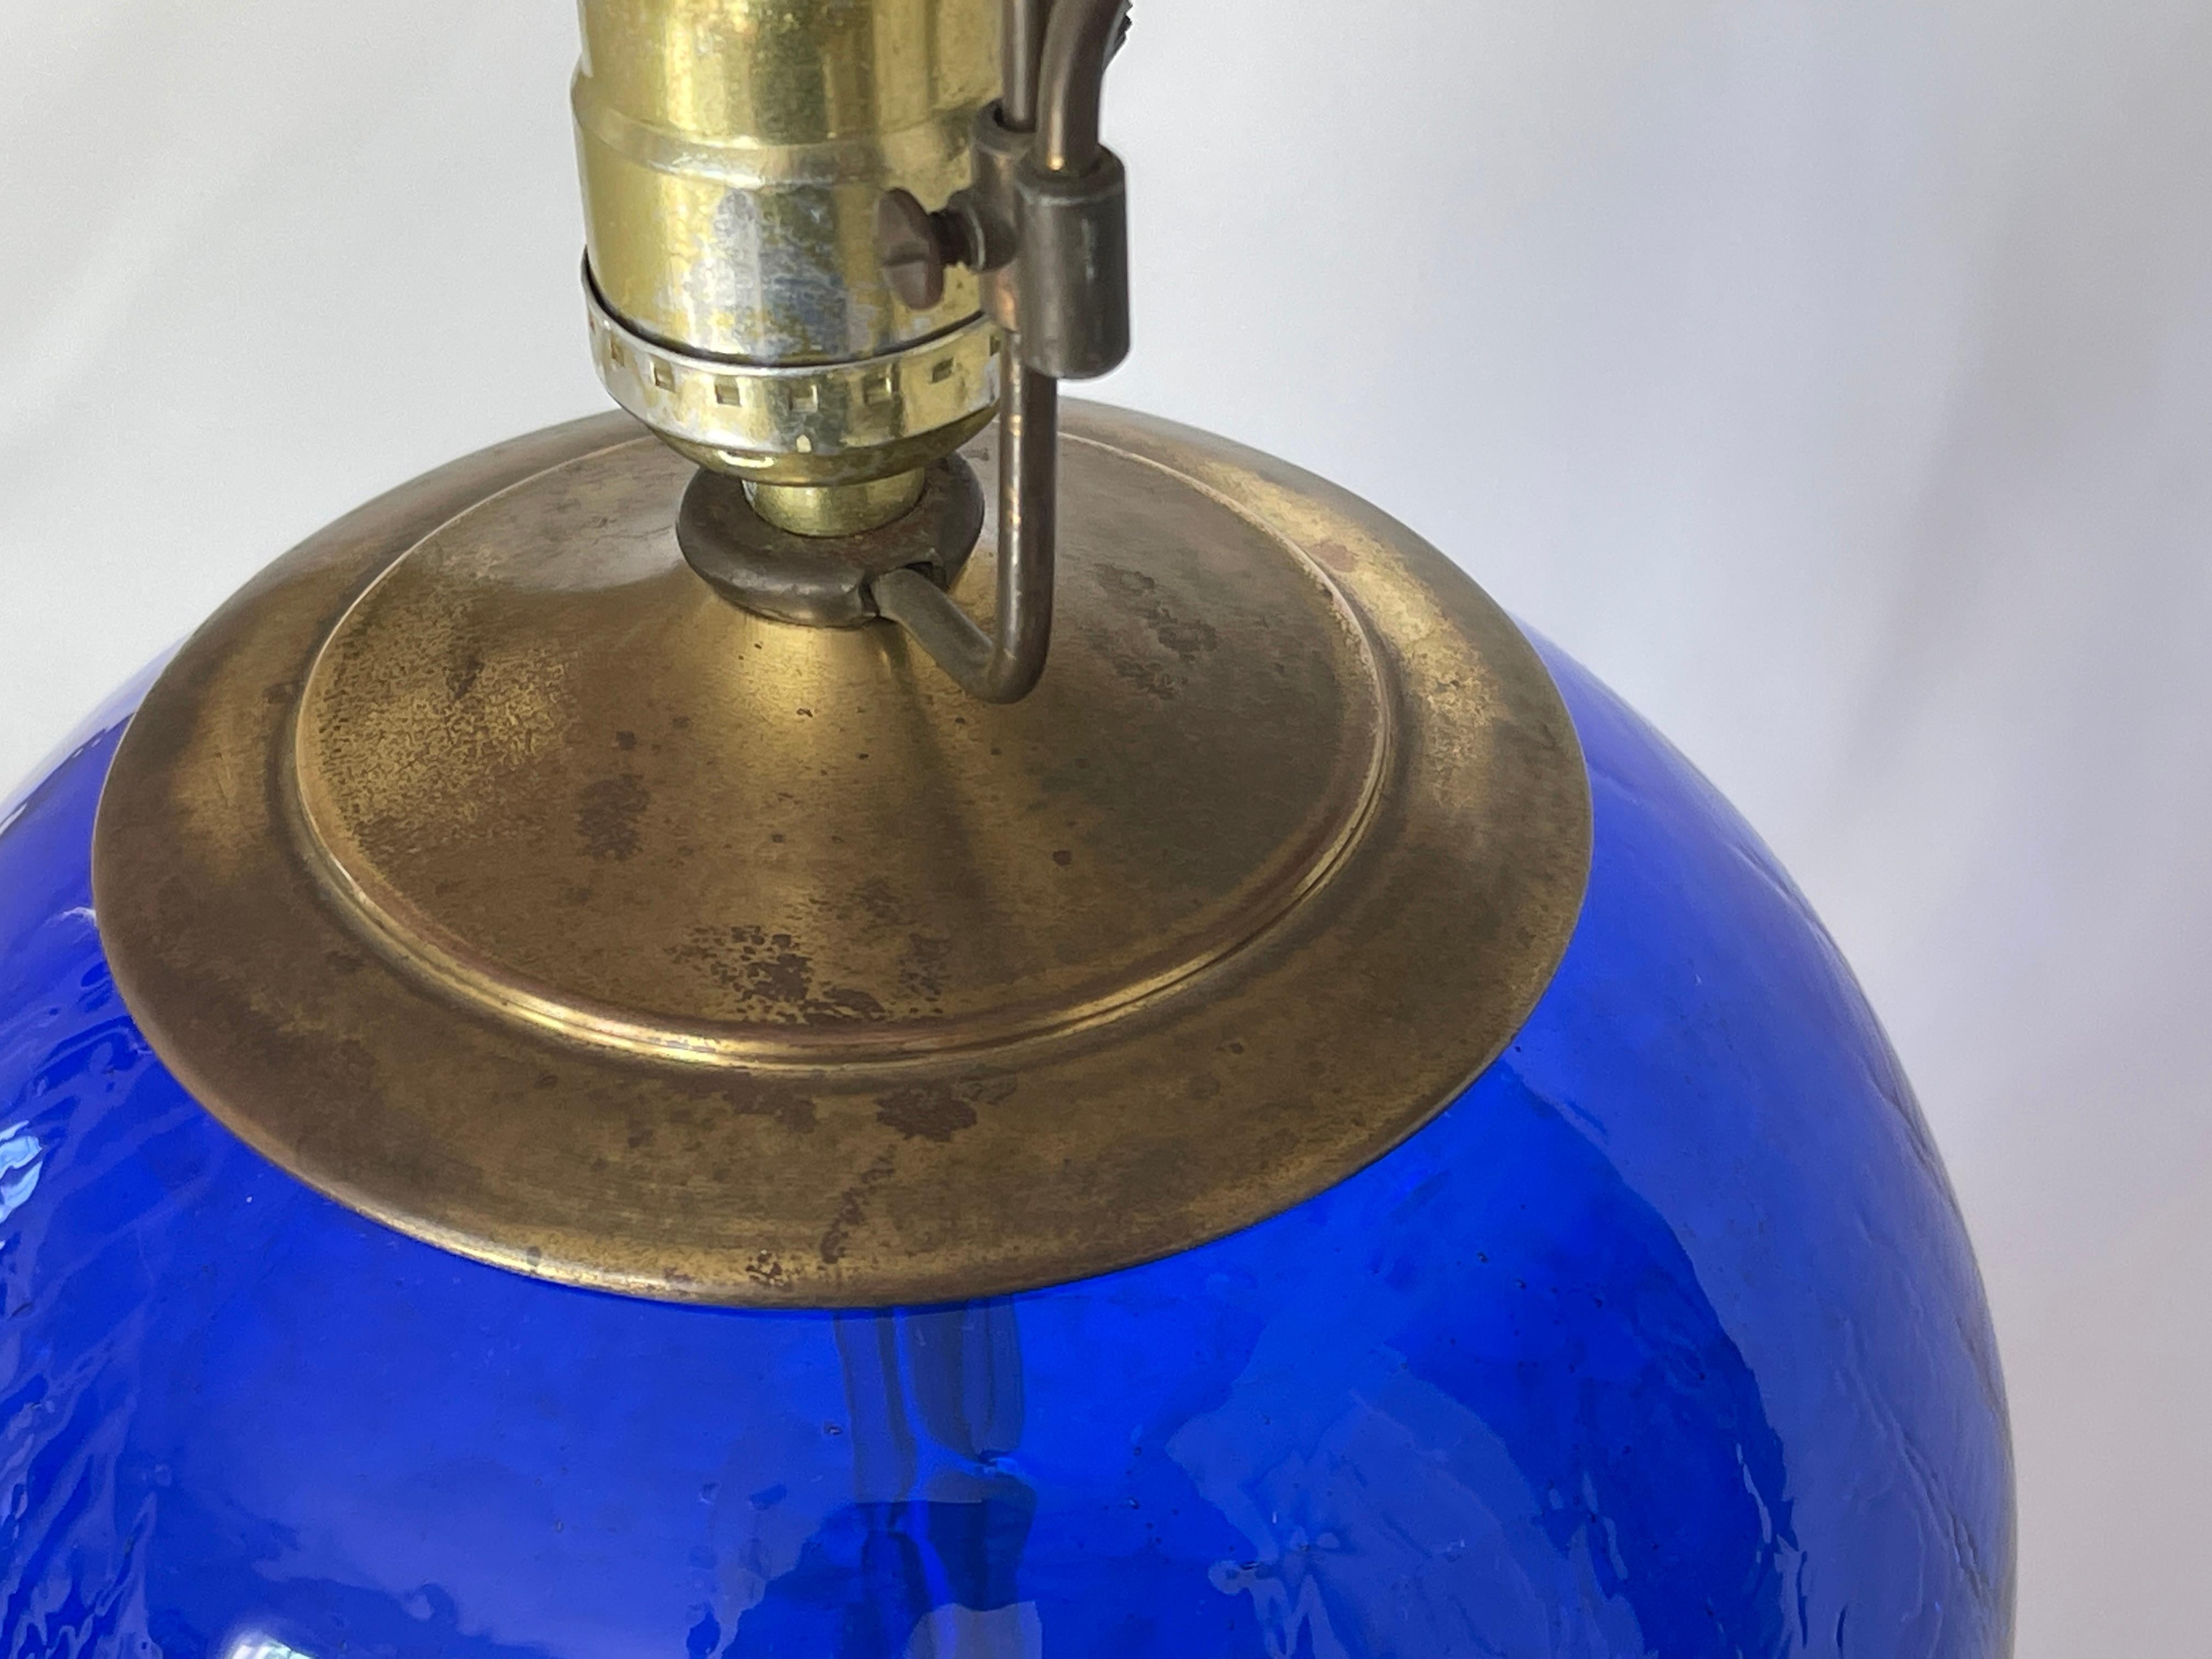 Blenko Signed Blue Crackled Glass Barrel Lamp In Good Condition For Sale In New York, NY